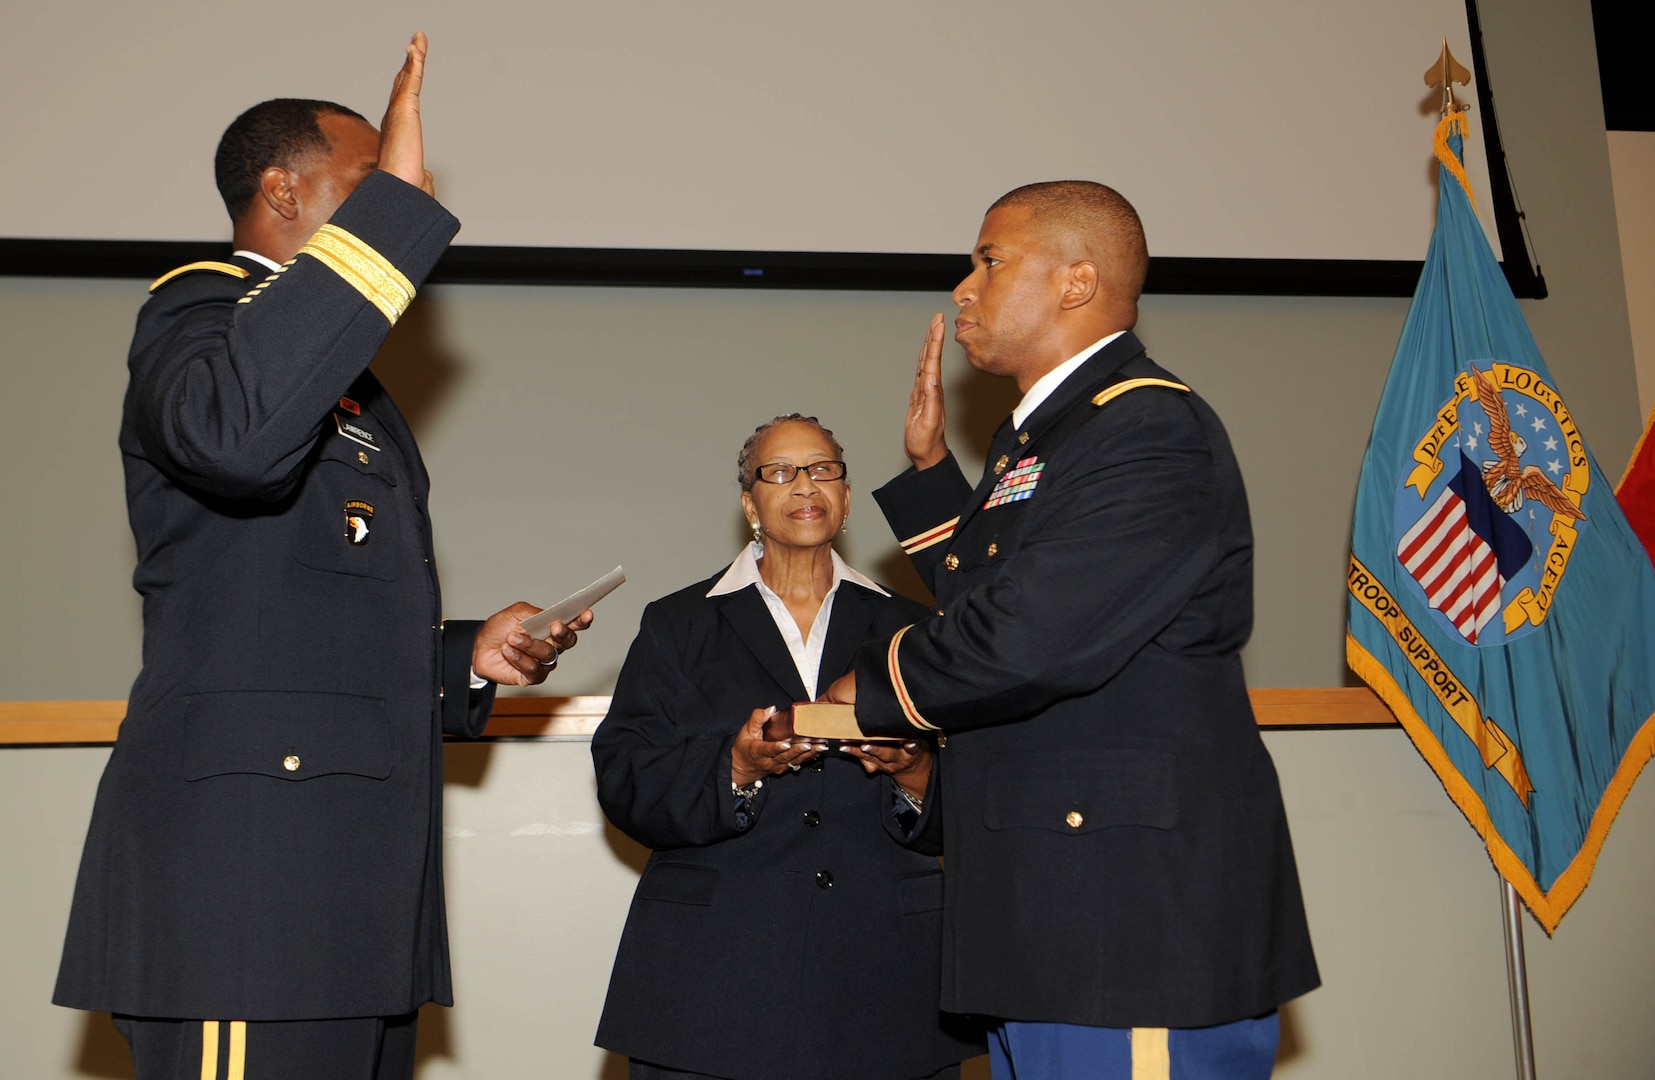 Army Col. Eric McCoy, right, reaffirms the oath of the commissioned officer with Brig. Gen. Gavin Lawrence, DLA Troop Support commander, left, as his mother, Arlene Fair, center, holds the Bible during a promotion ceremony in Philadelphia, Oct. 3, 2019. McCoy, a Baltimore native, is the Troop Support Subsistence supply chain director.